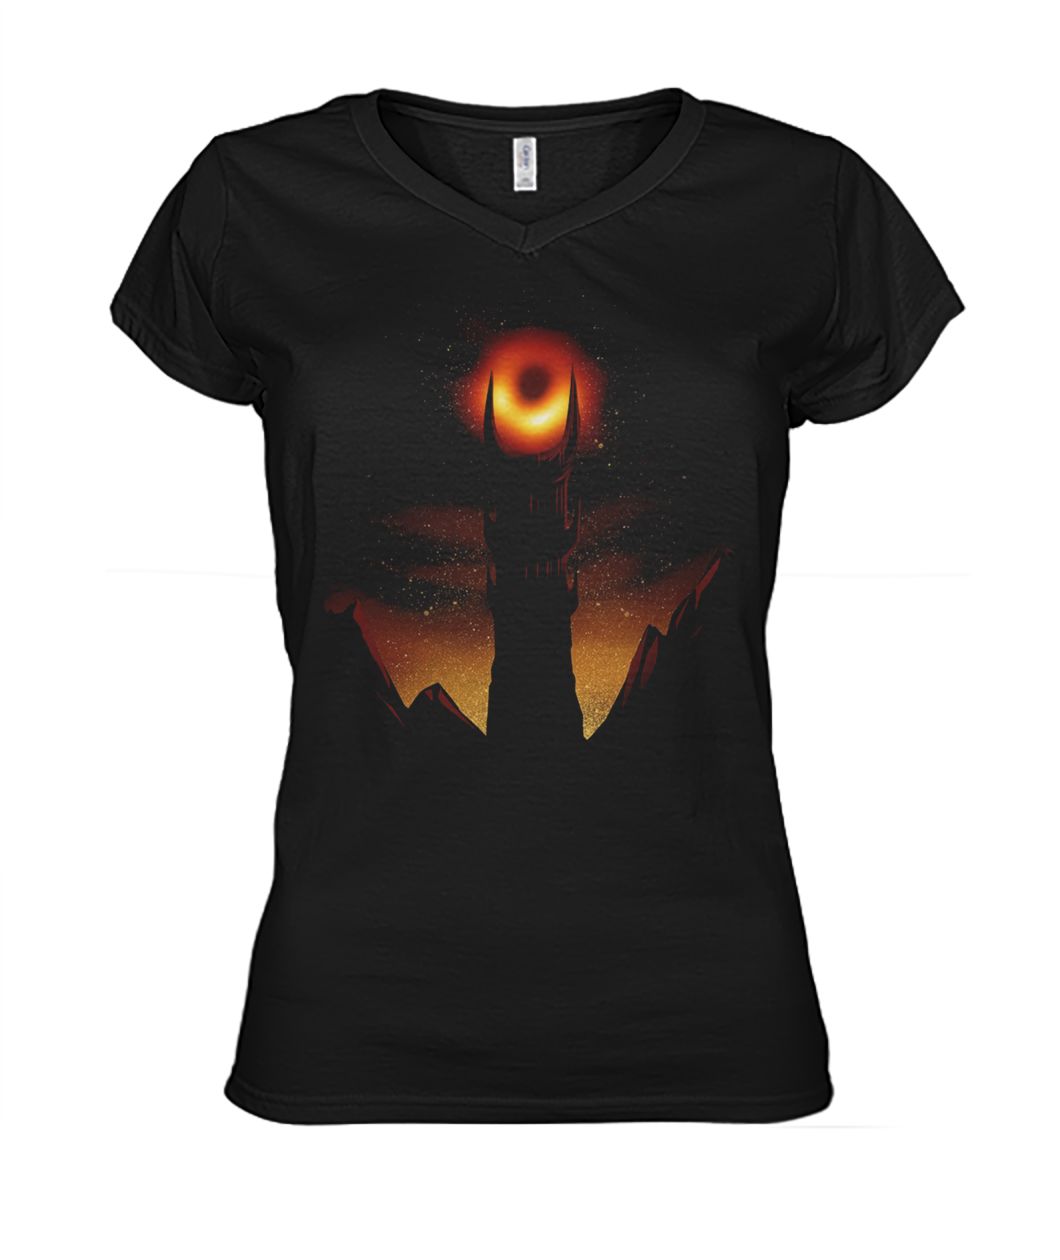 First photo of black hole sauron women's v-neck